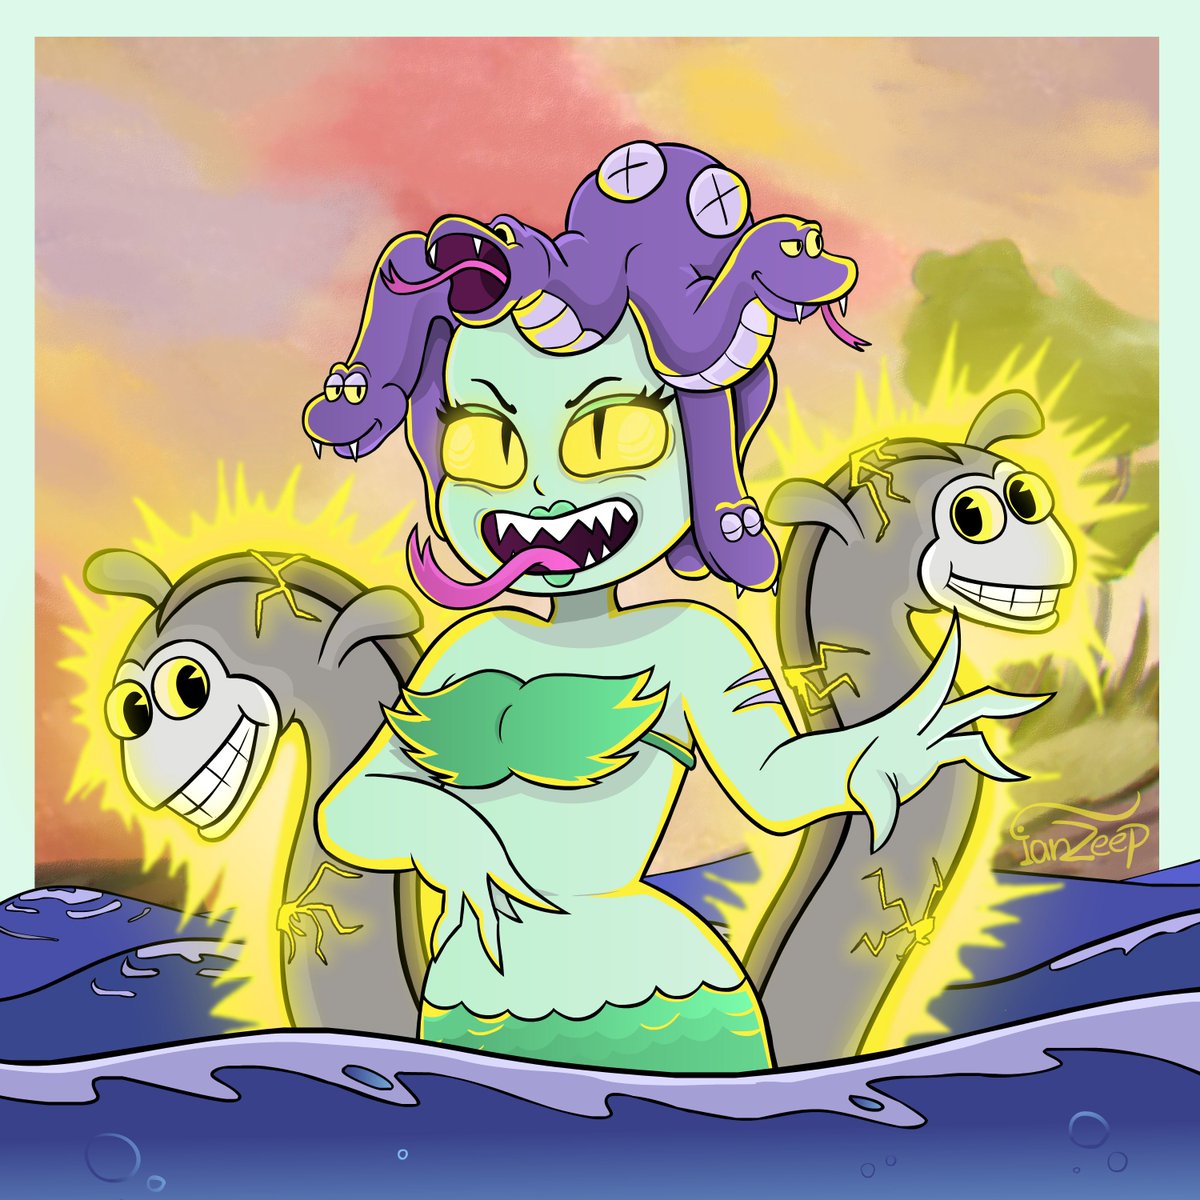 ► Cala Maria 🎨 By IanZeep 
[ianzeep.deviantart.com] 
Character from the game: Cuphead 'Don't deal with the devil'

#mermaid #cala_maria #calamaria #calamariacuphead #cuphead #cupheaddontdealwiththedevil #cartoon #game